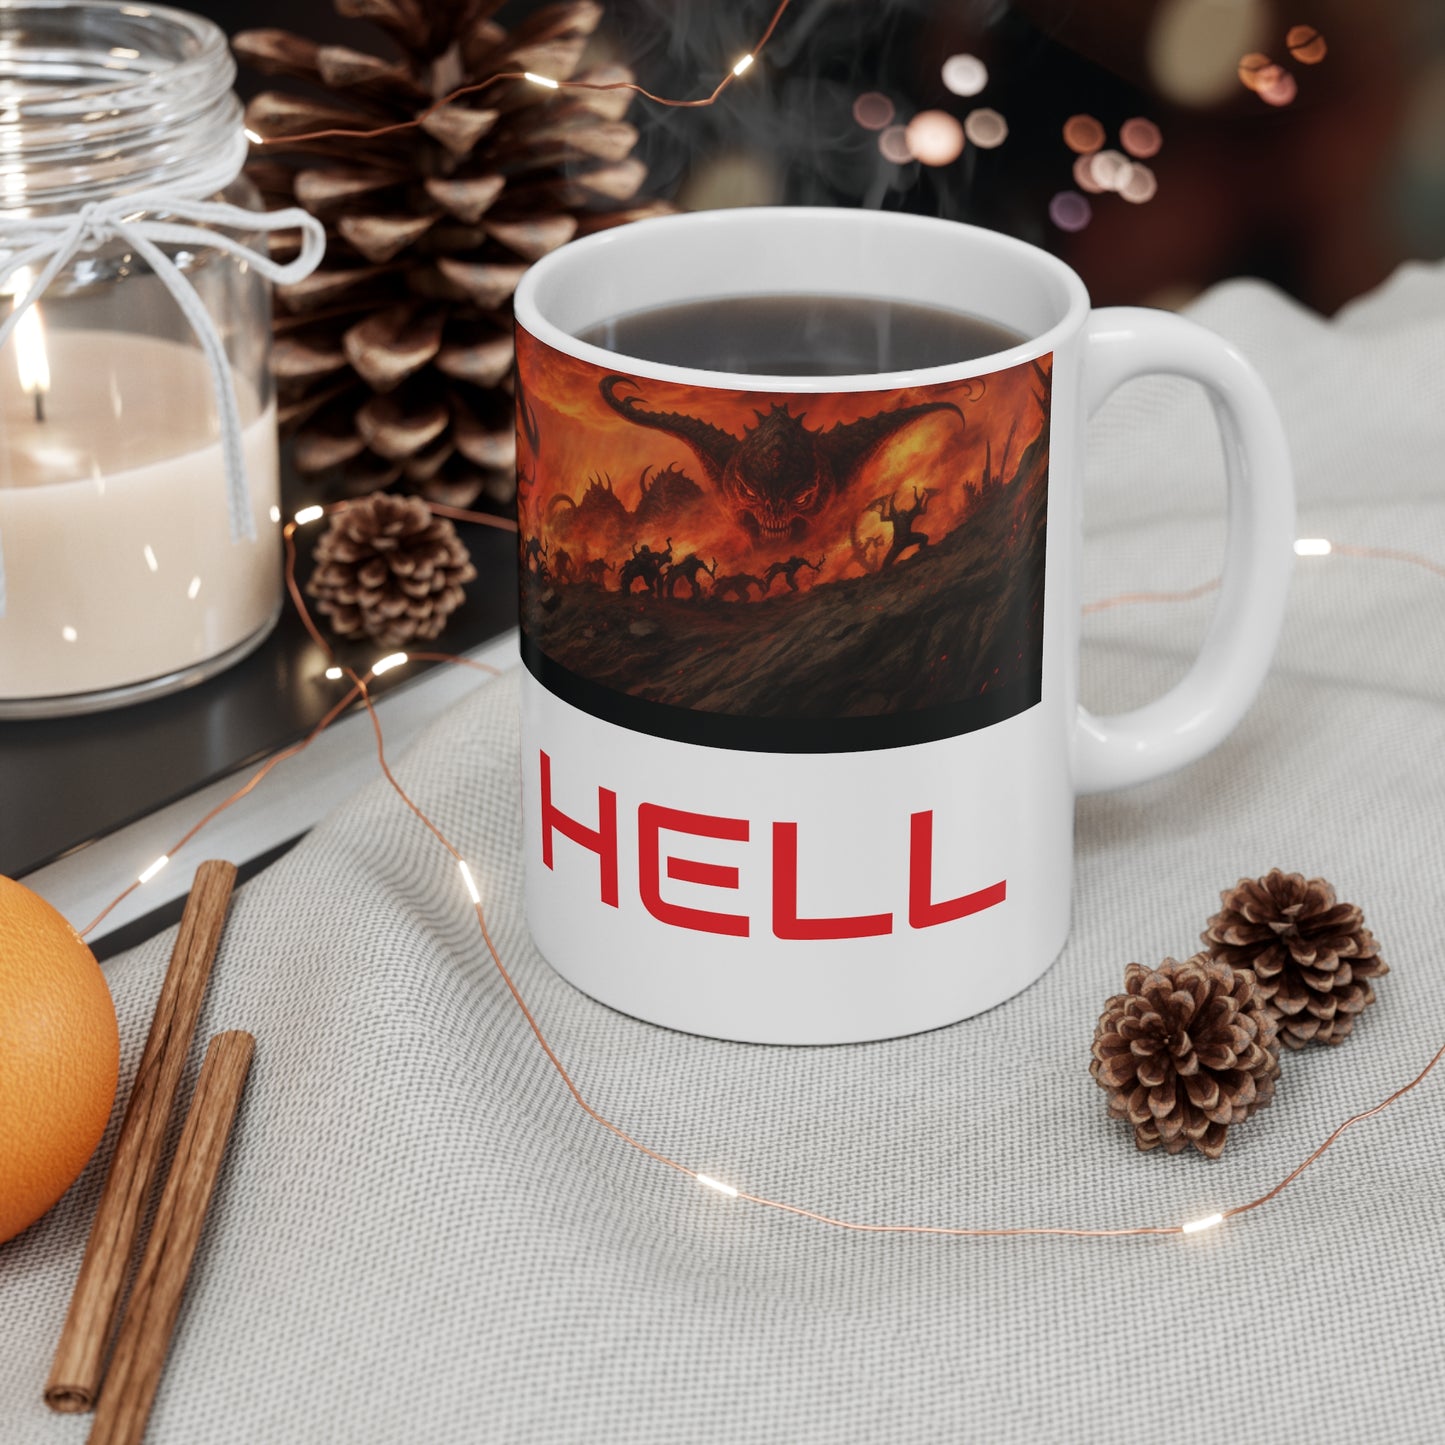 ifllucial FKN HELL MUG, Original Art By ifllucial.
White ceramic
11 oz (0.33 l)
Rounded corners
C-handle
Lead and BPA-freeMug